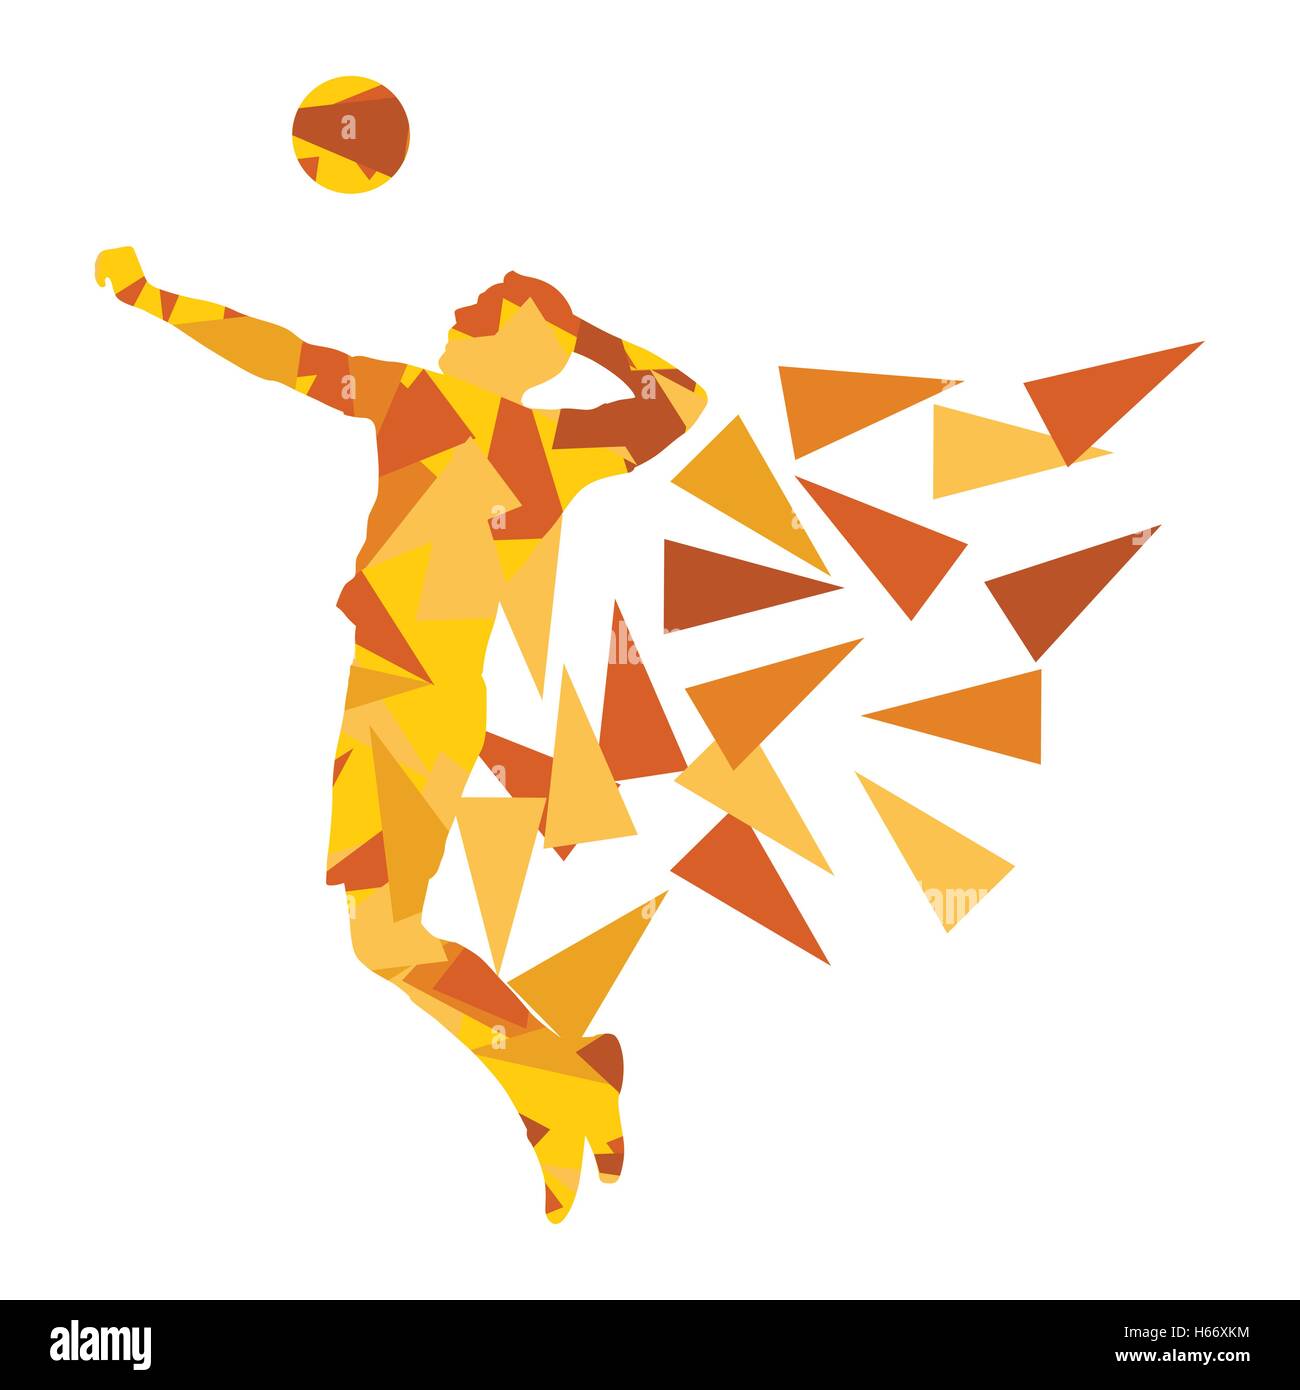 Volleyball player man silhouette made of polygon fragments vector background concept isolated on white Stock Vector